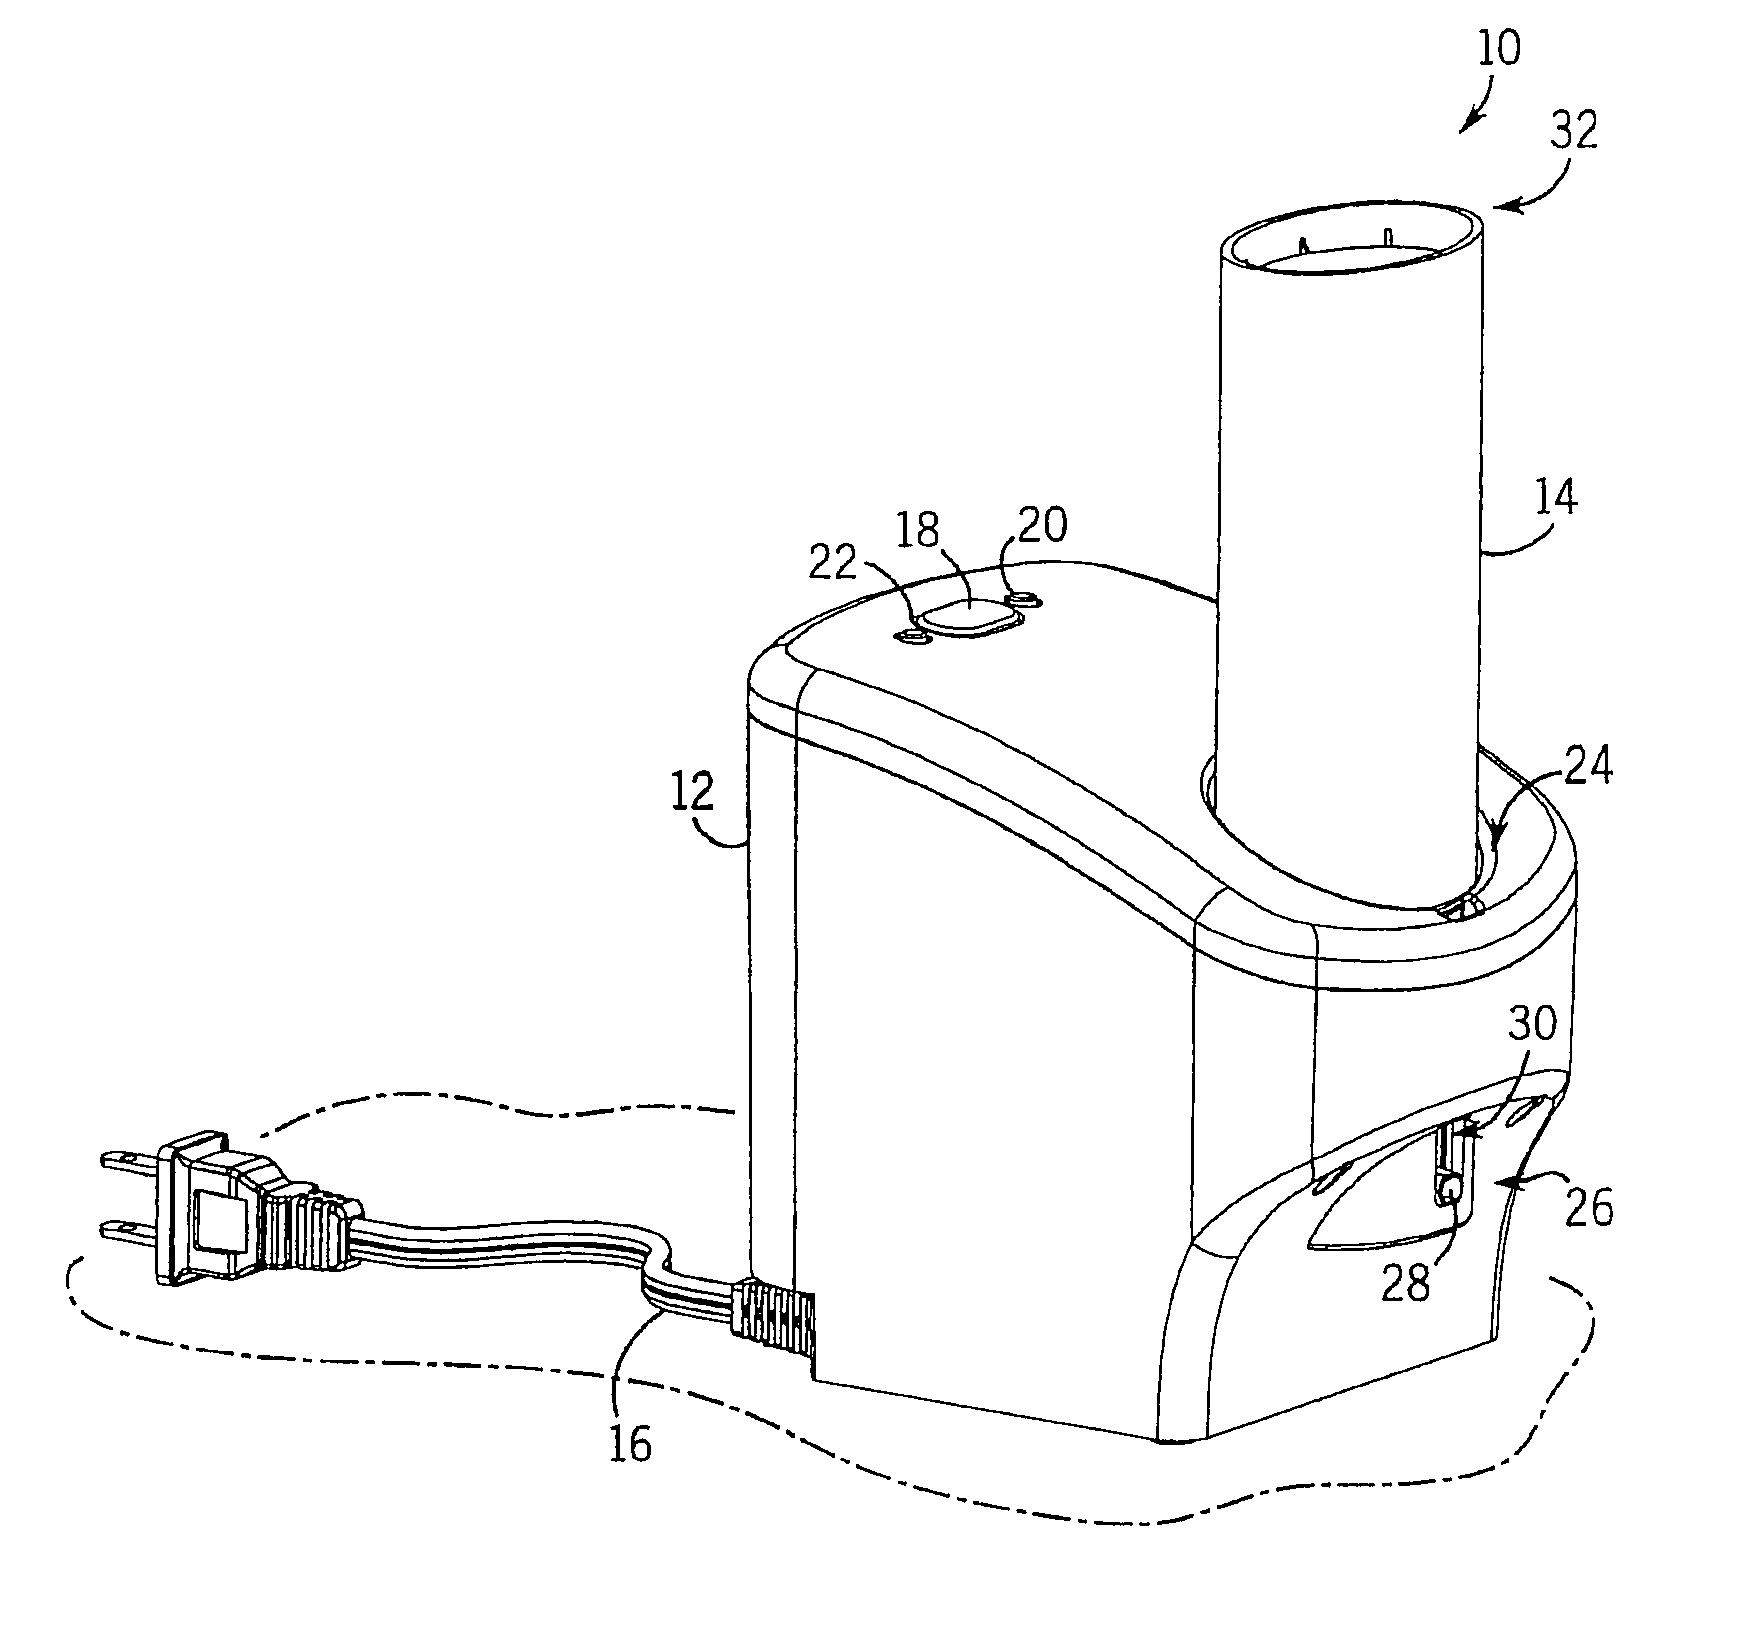 Heated flowable product dispenser